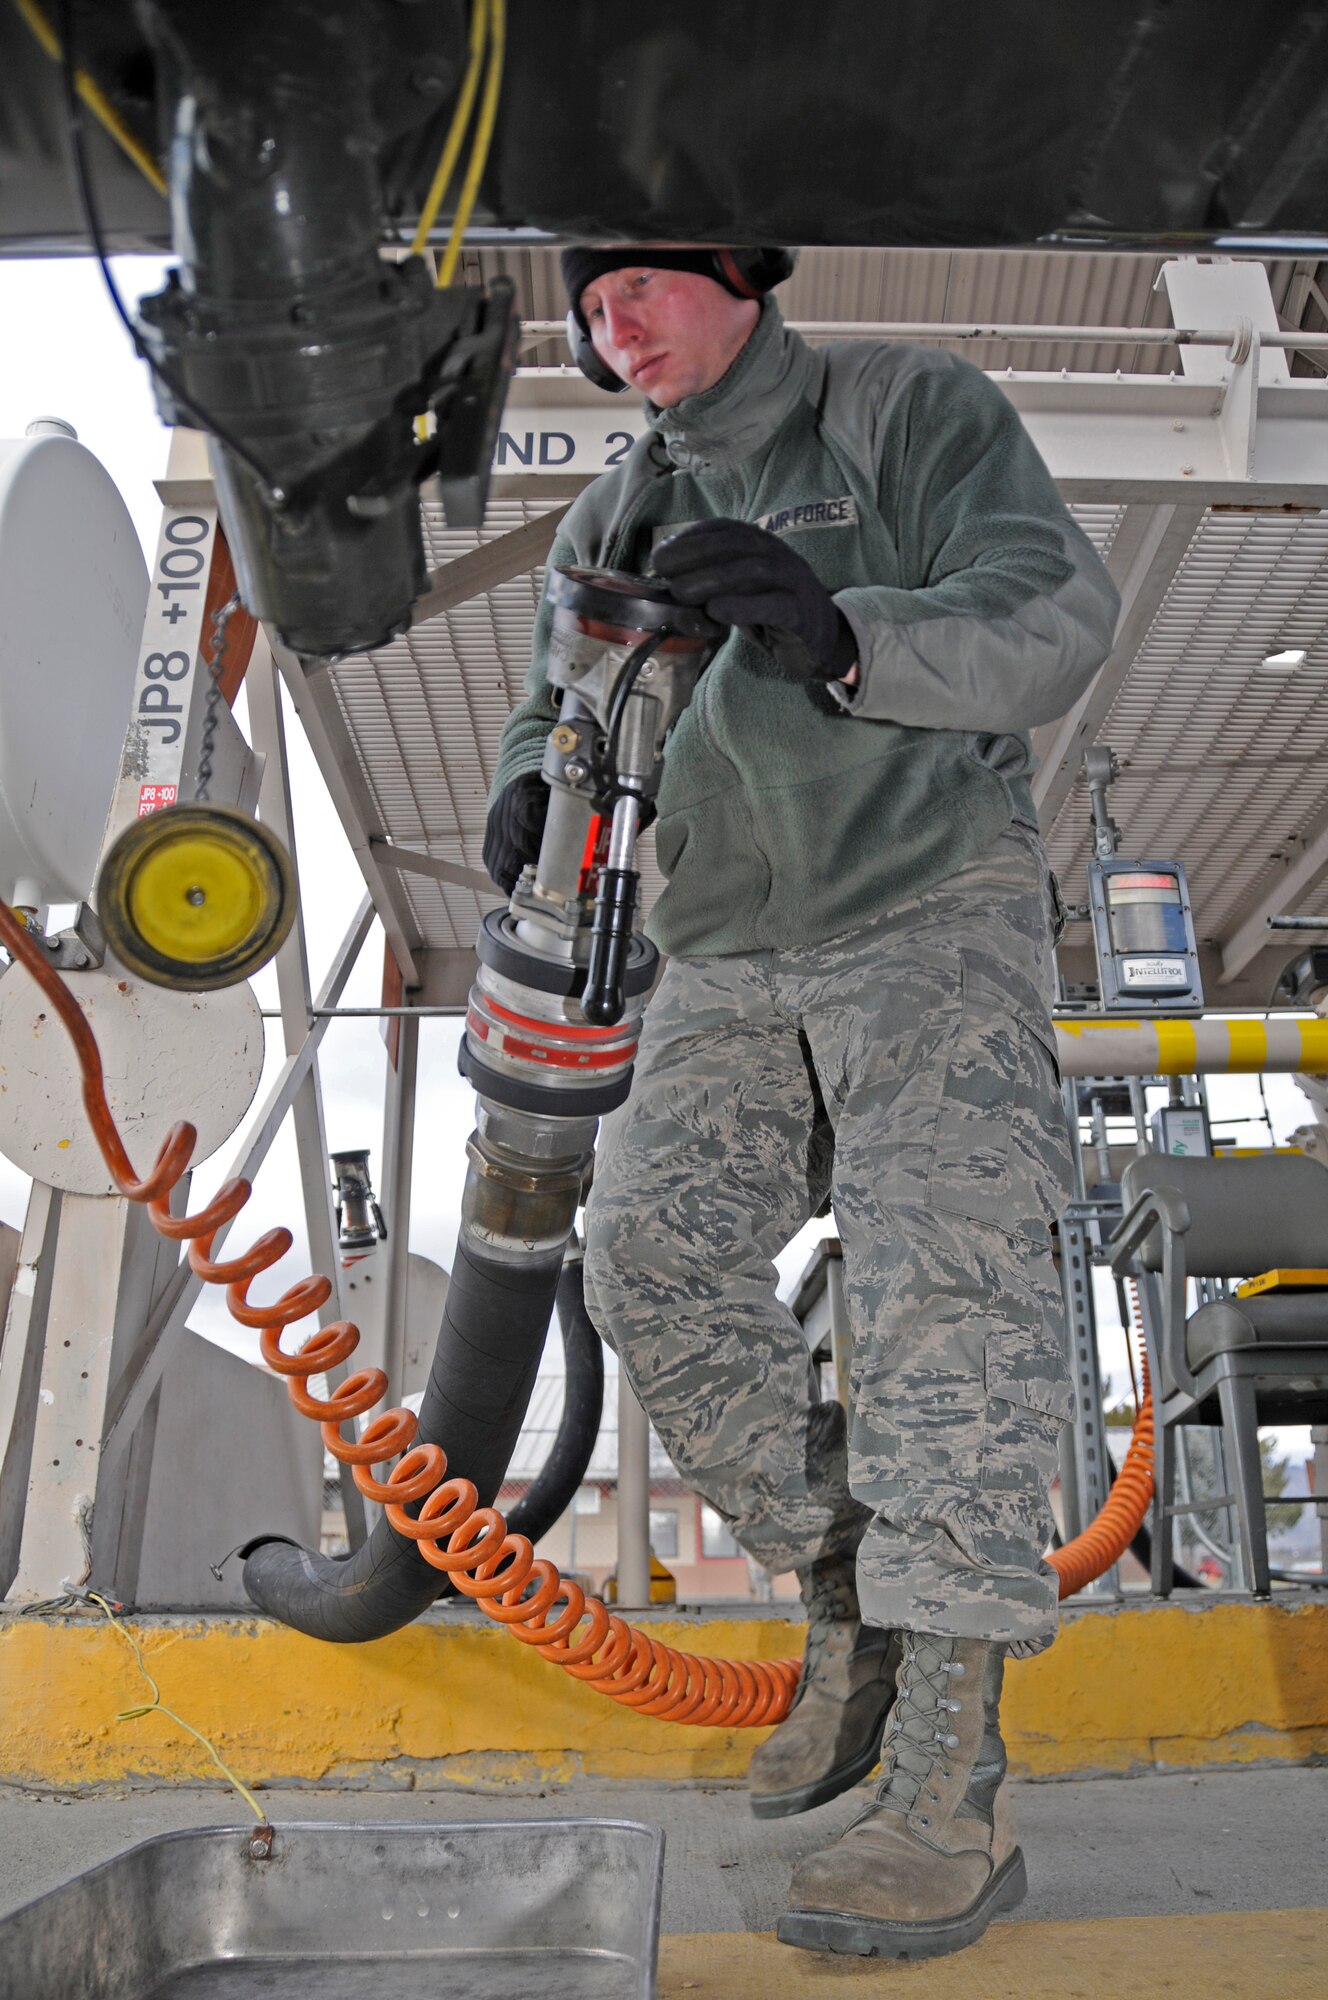 Staff Sgt. Colin Carr pumps prepares to fill a waiting tanker truck before taking it to the flightline to refuel jets returning from missions flown in the morning.
